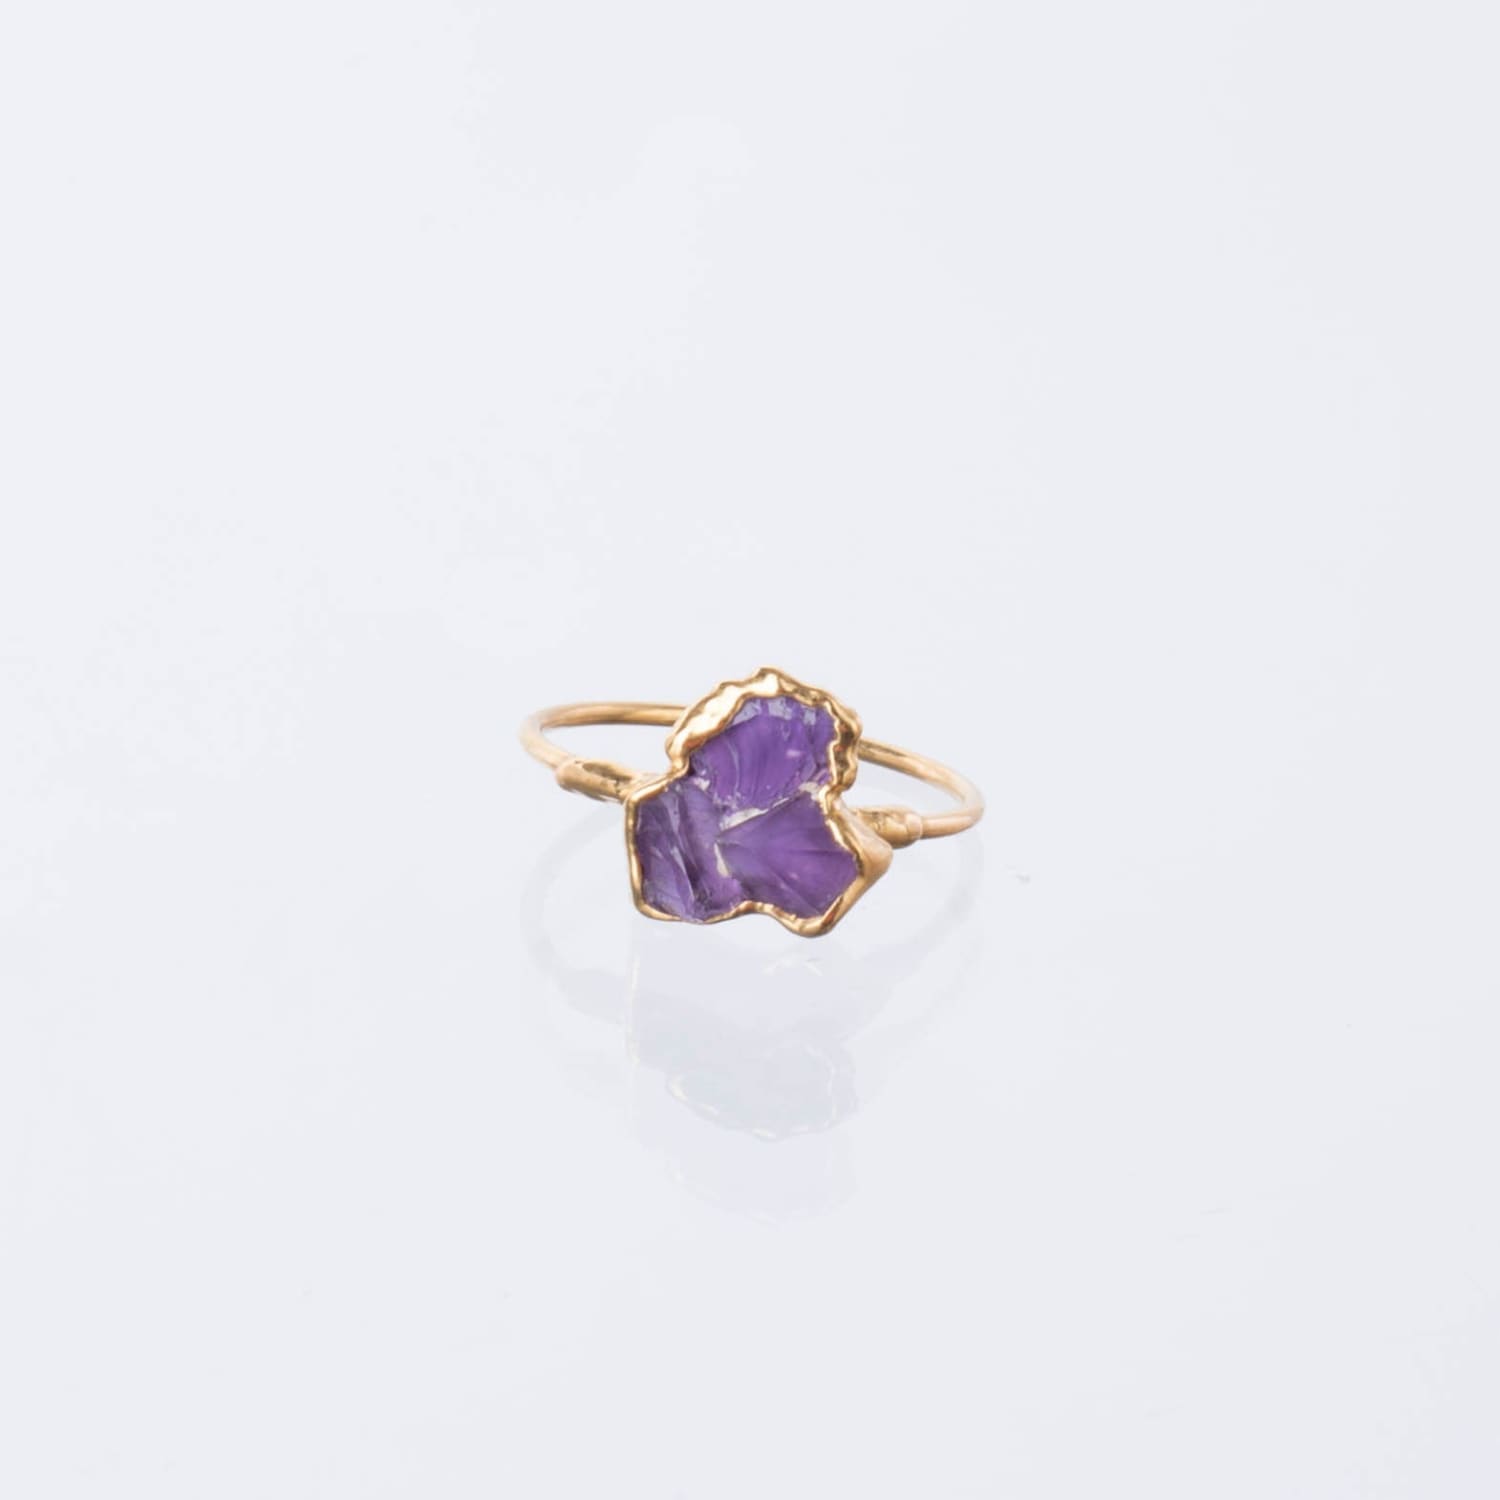 Triple Raw Amethyst Cluster Ring Stone Gold Statement